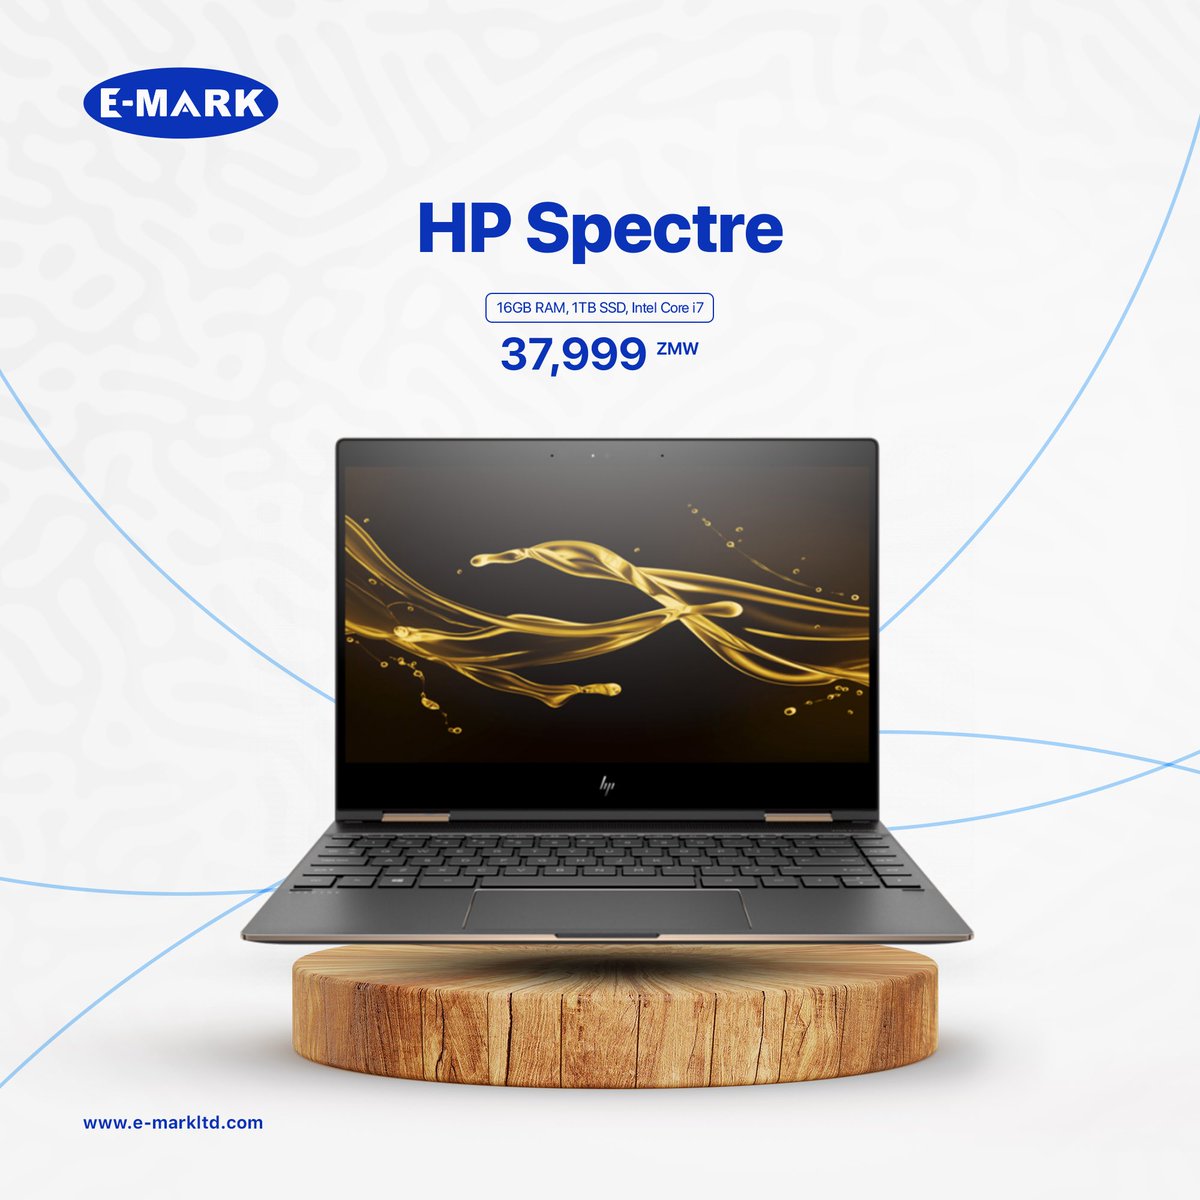 The Hp Spectre x360 14 delivers good performance and future-proofing with intel’s new Core Ultra CPU. Its all-metallic chassis brings out its beauty coupled with features like strong AV output with OLED display, quad speakers and a super-sharp 9 megapixel webcam.